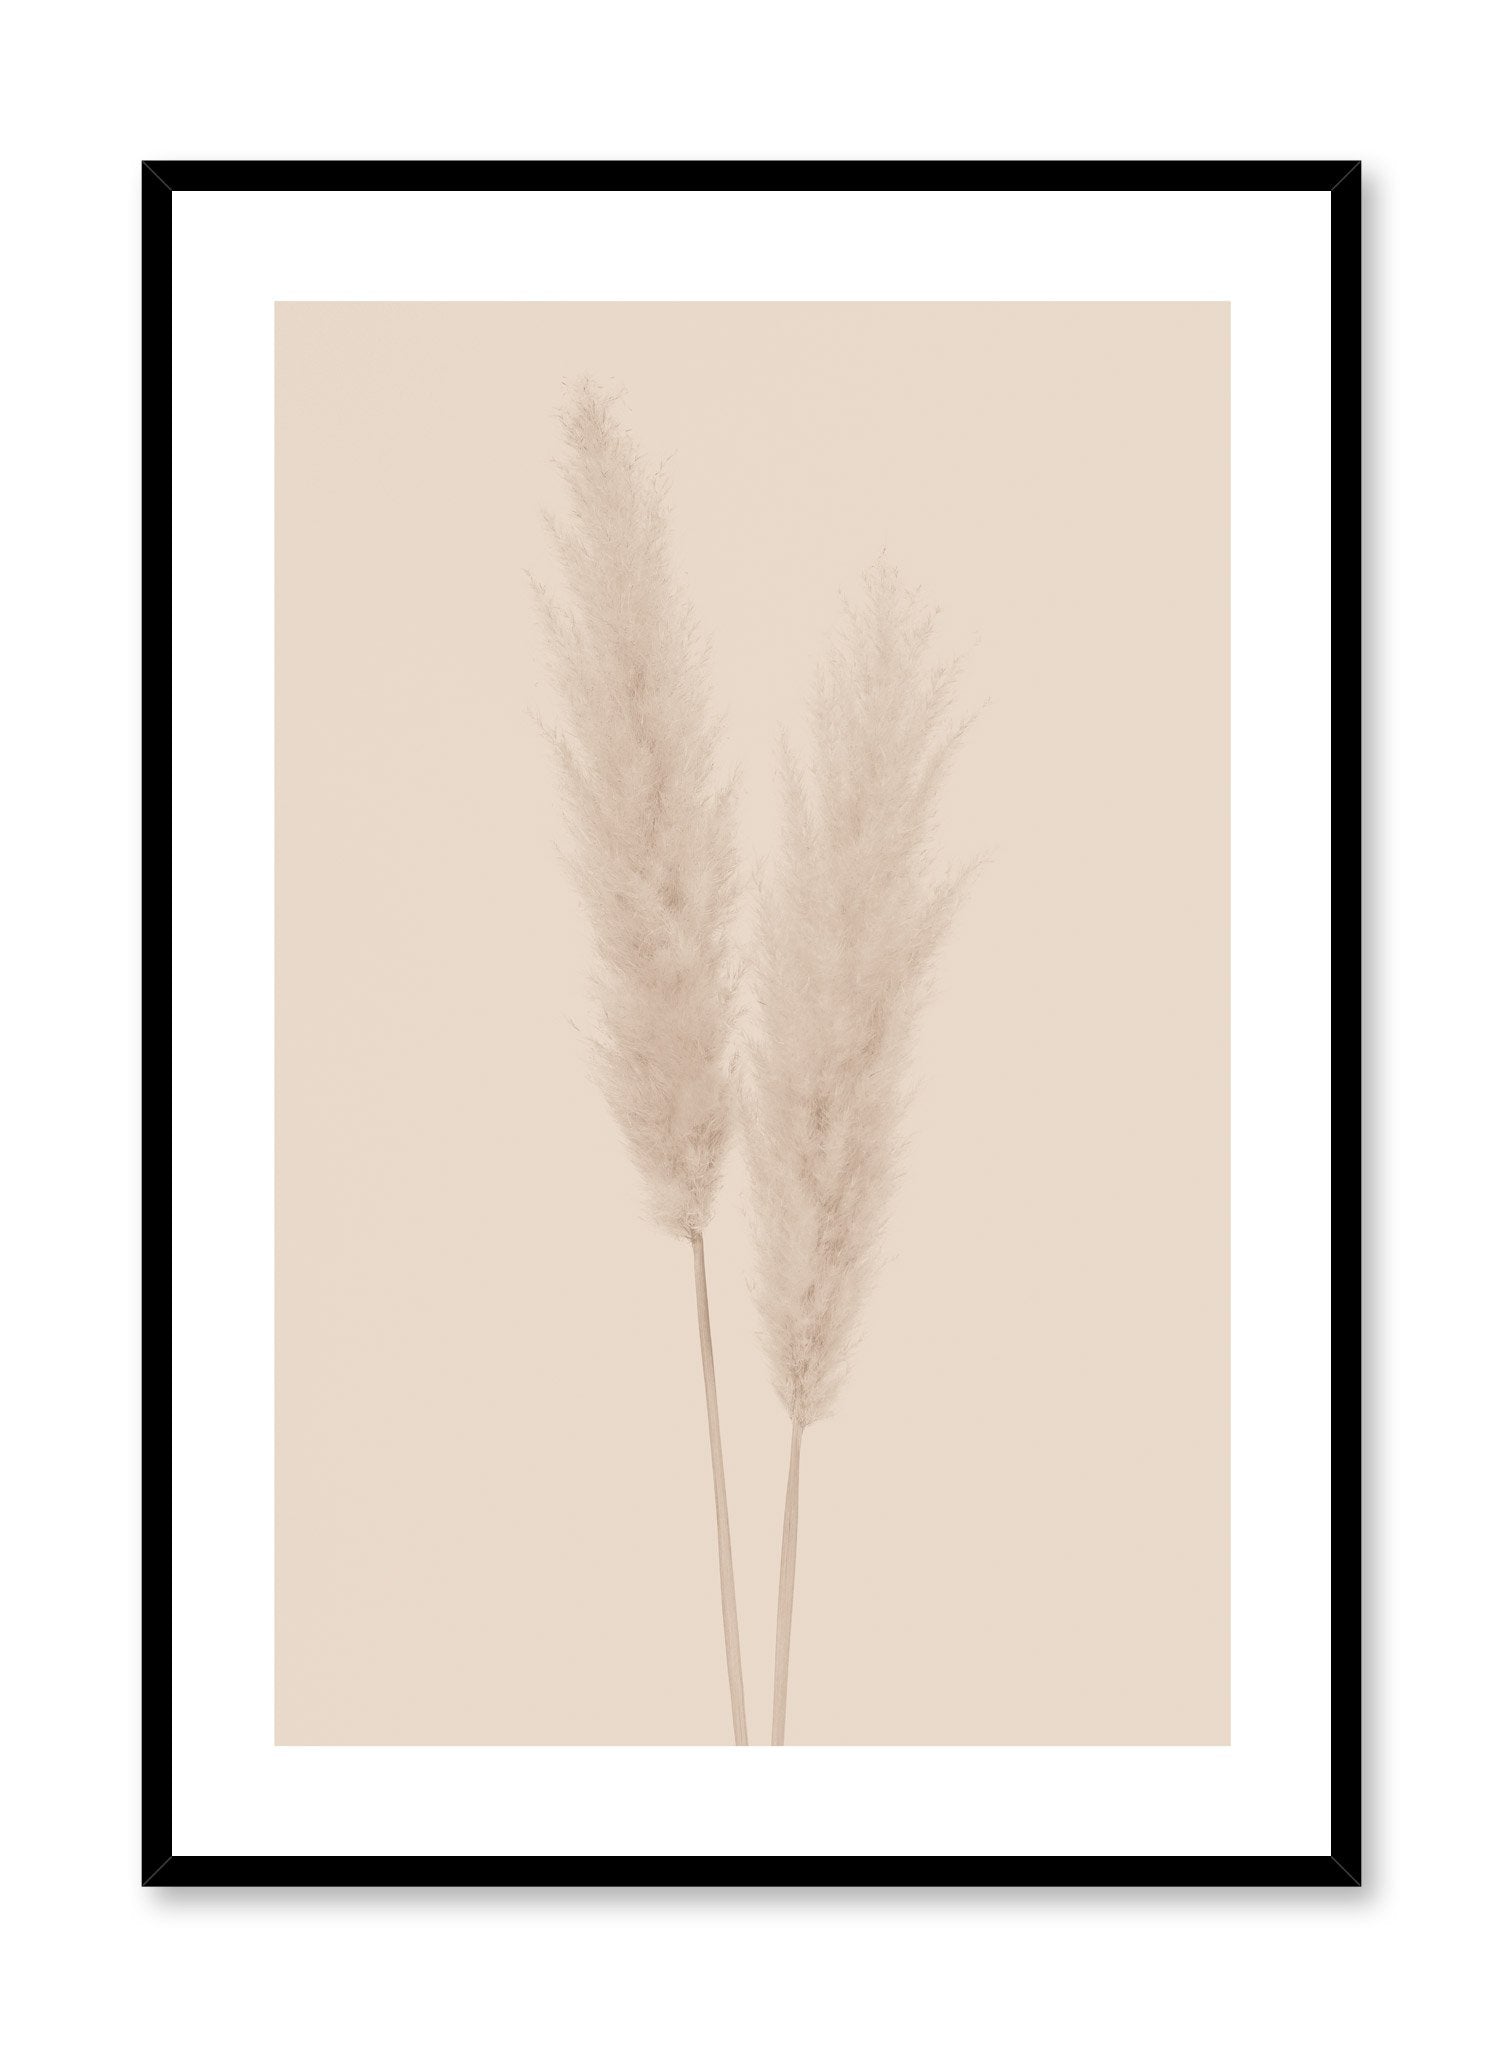 Minimalistic wall poster by Opposite Wall with grasses botanical photography in beige